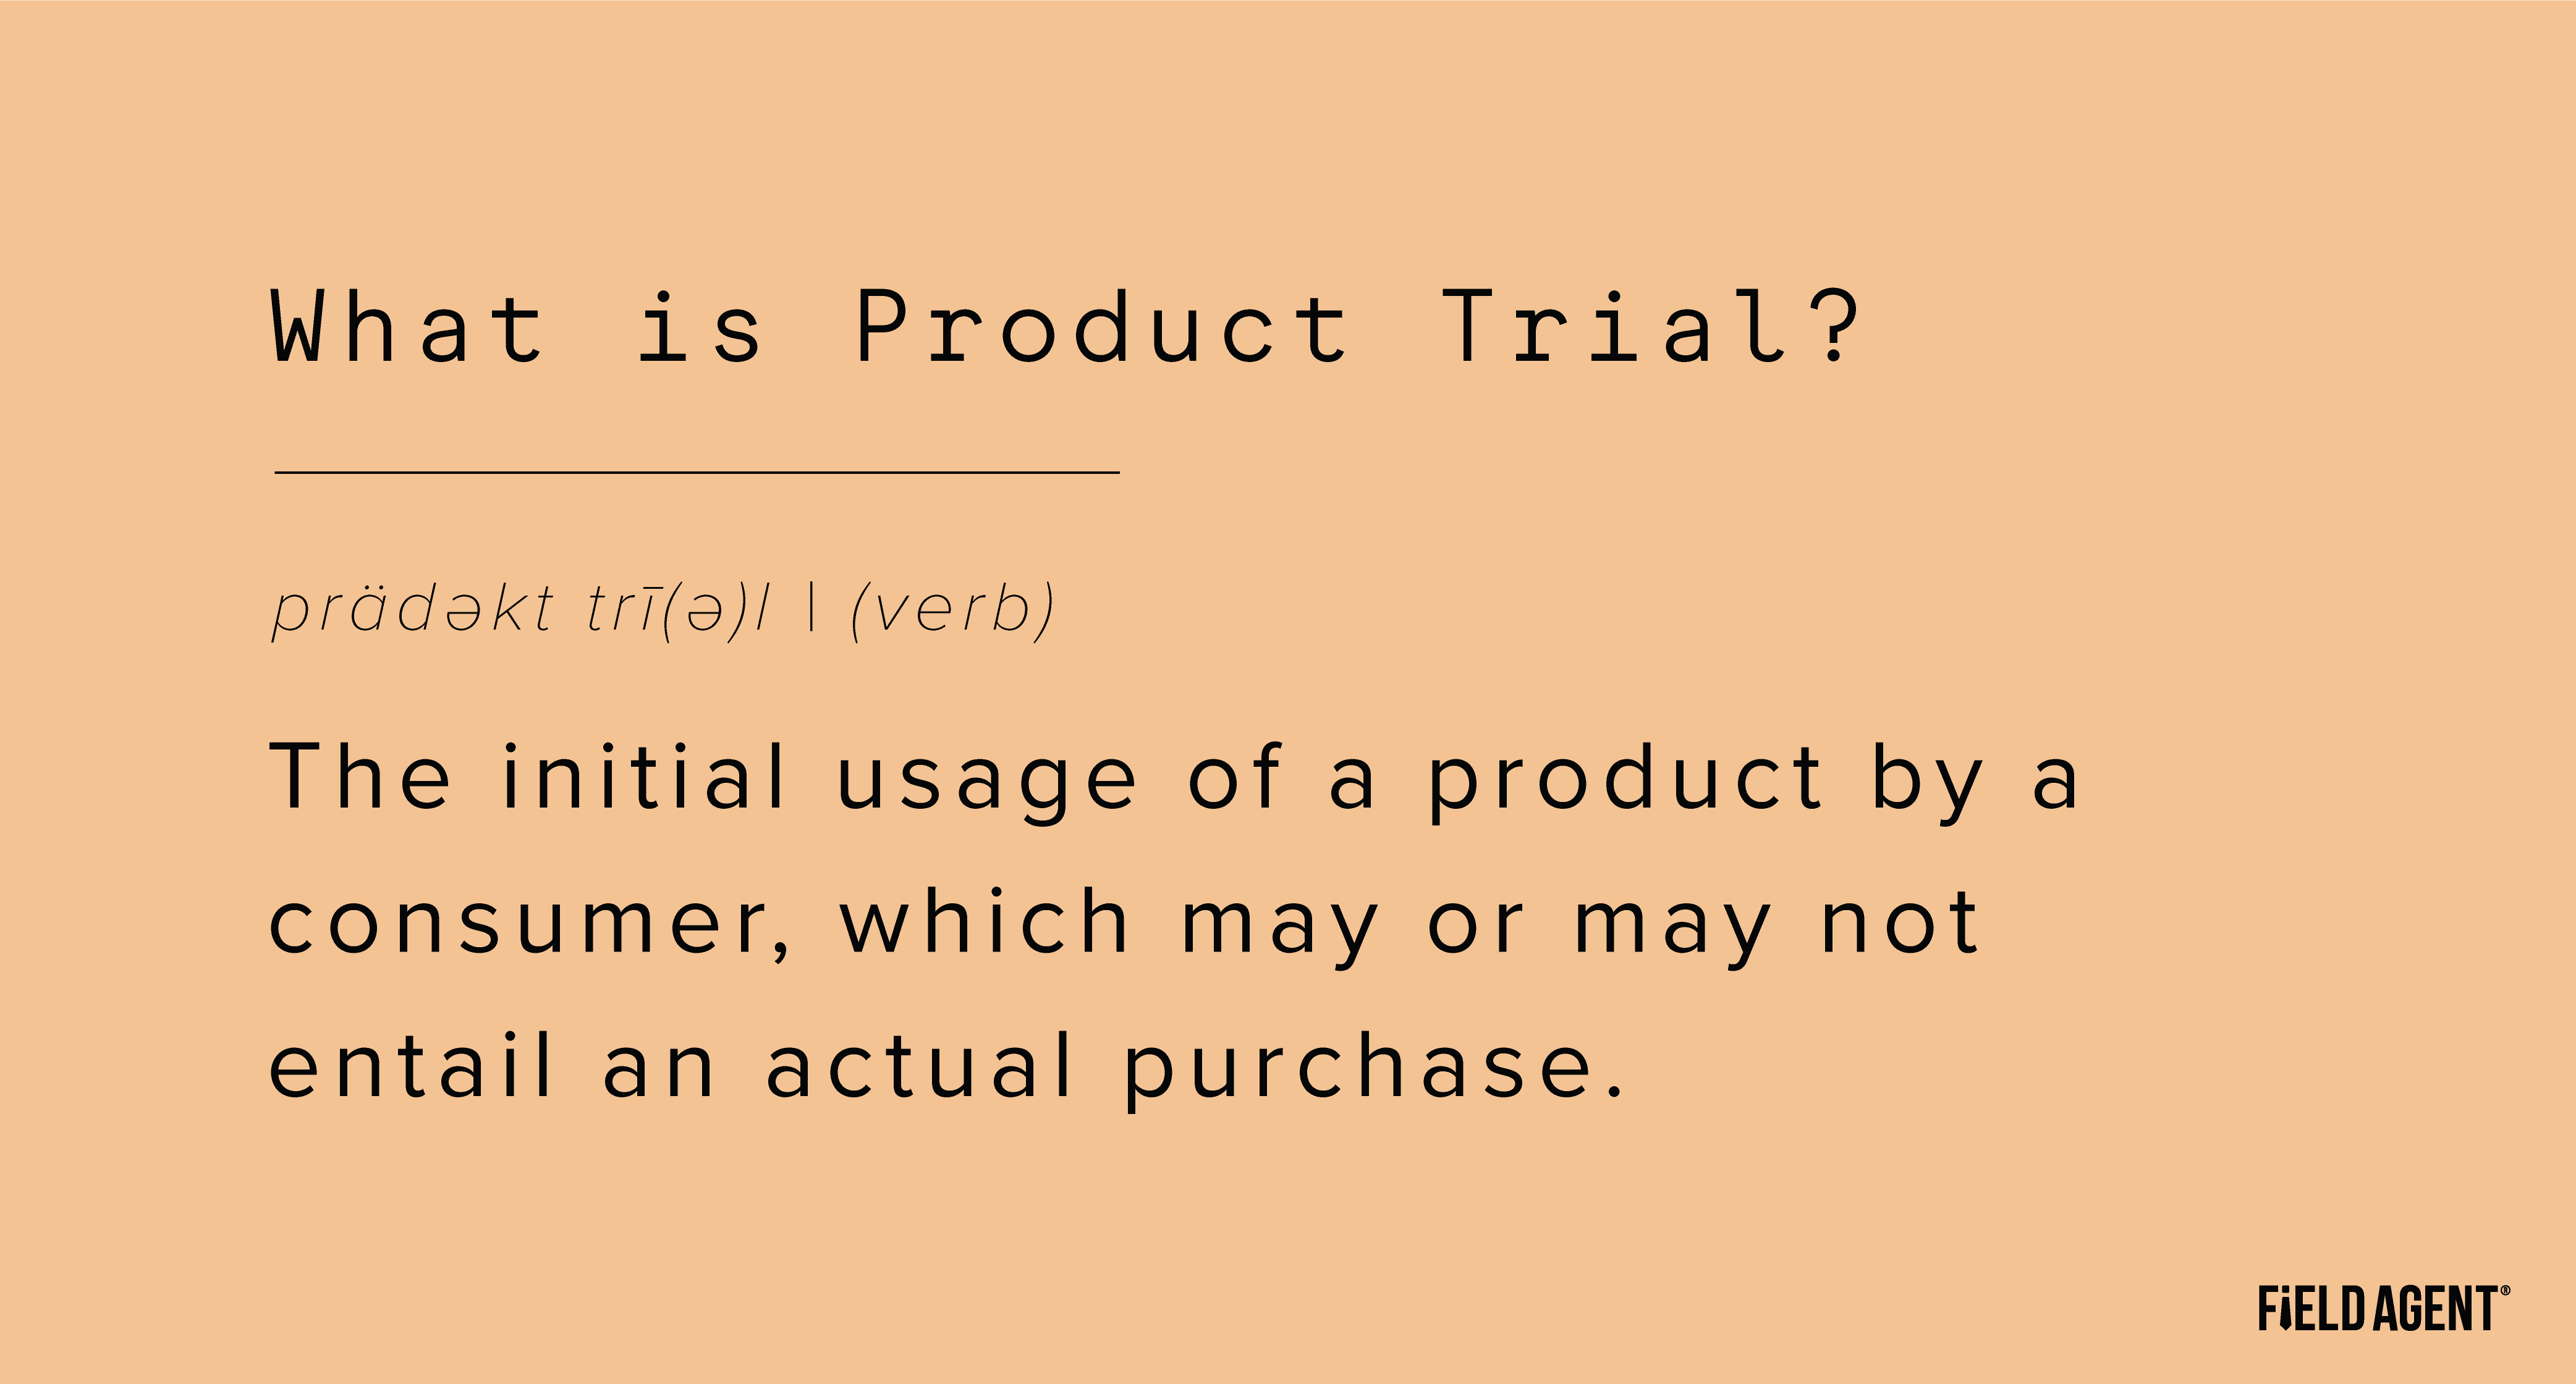 The definition of product trial